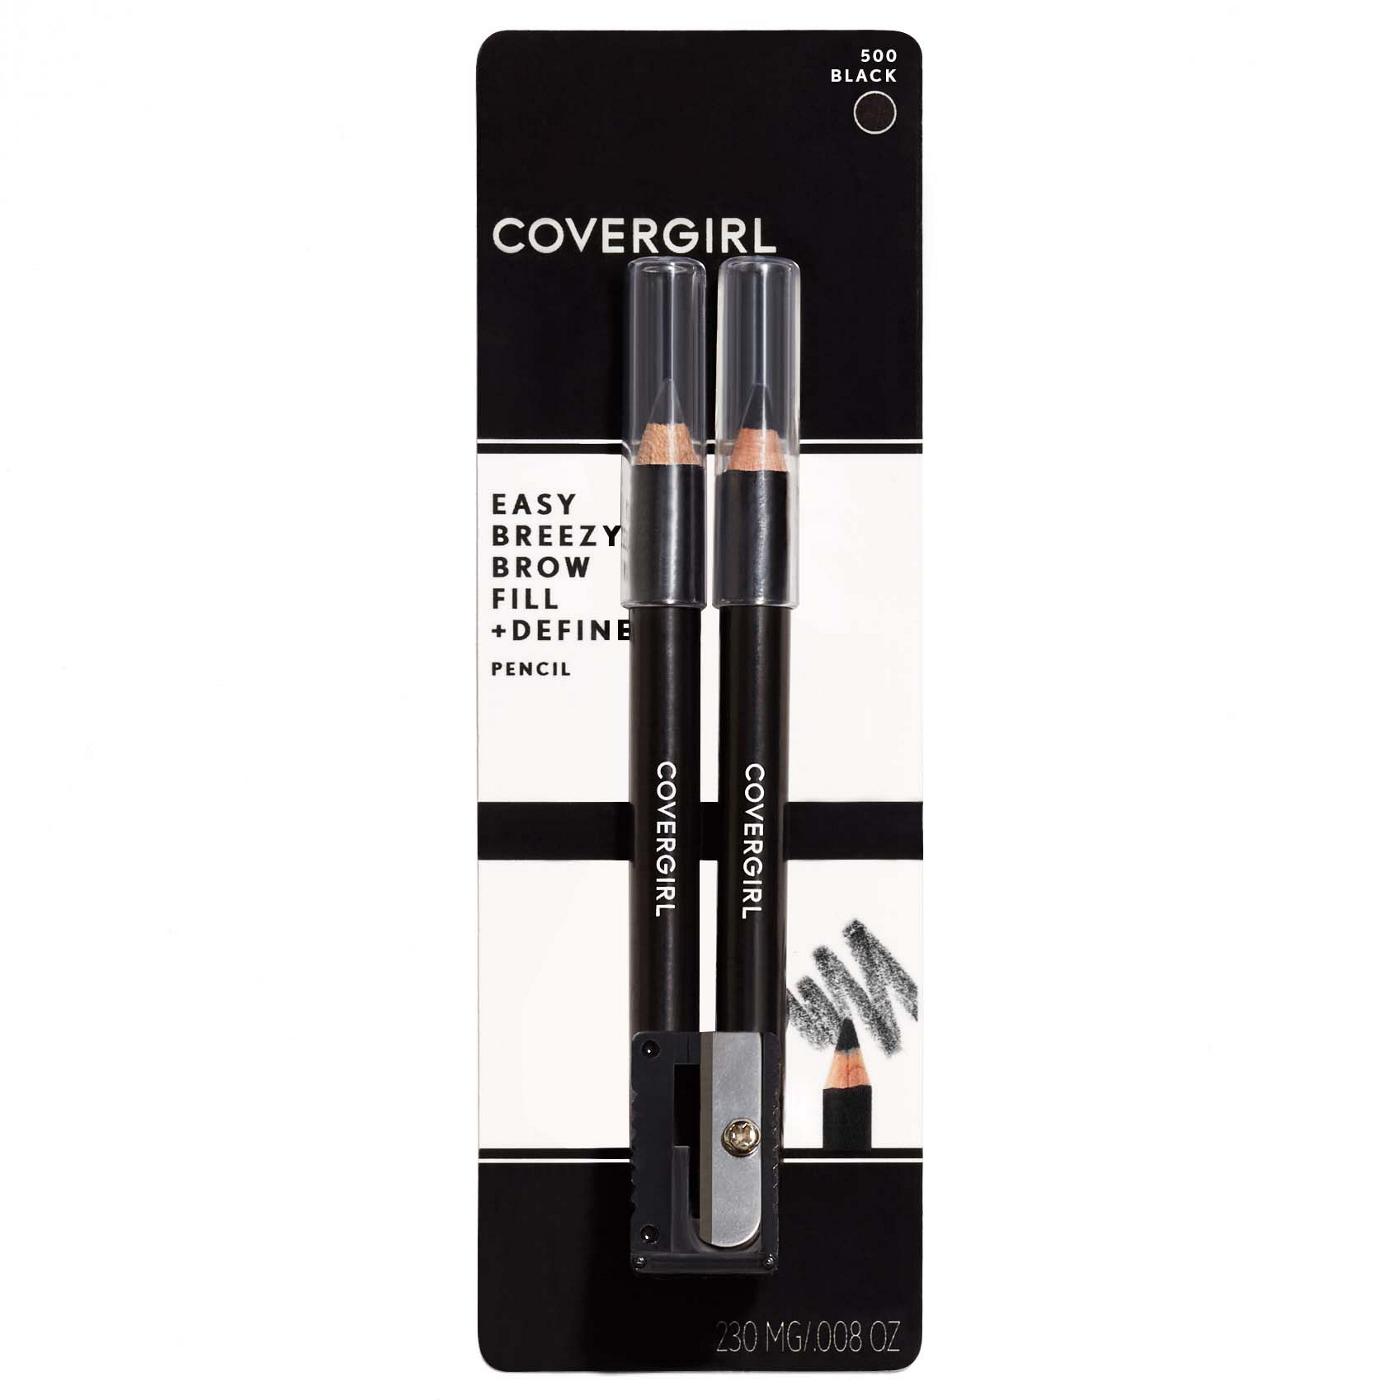 Covergirl Easy Breezy Brow Fill + Define Pencils 500 Midnight Black; image 1 of 5